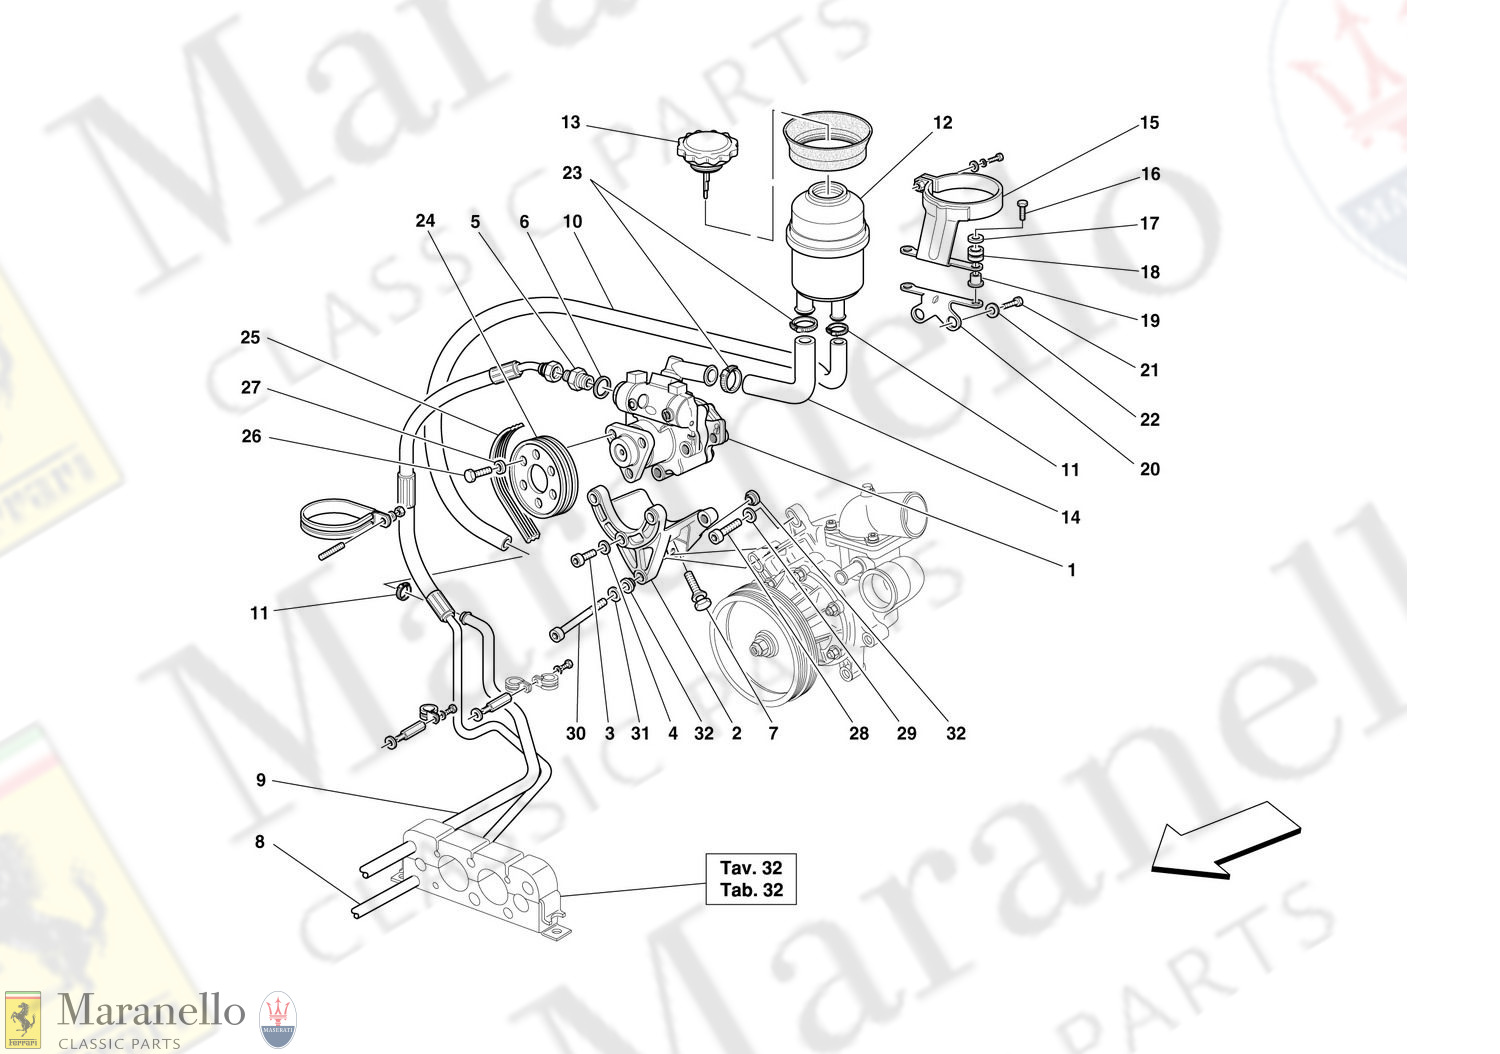 037 - Hydraulic Steering Pump And Tank